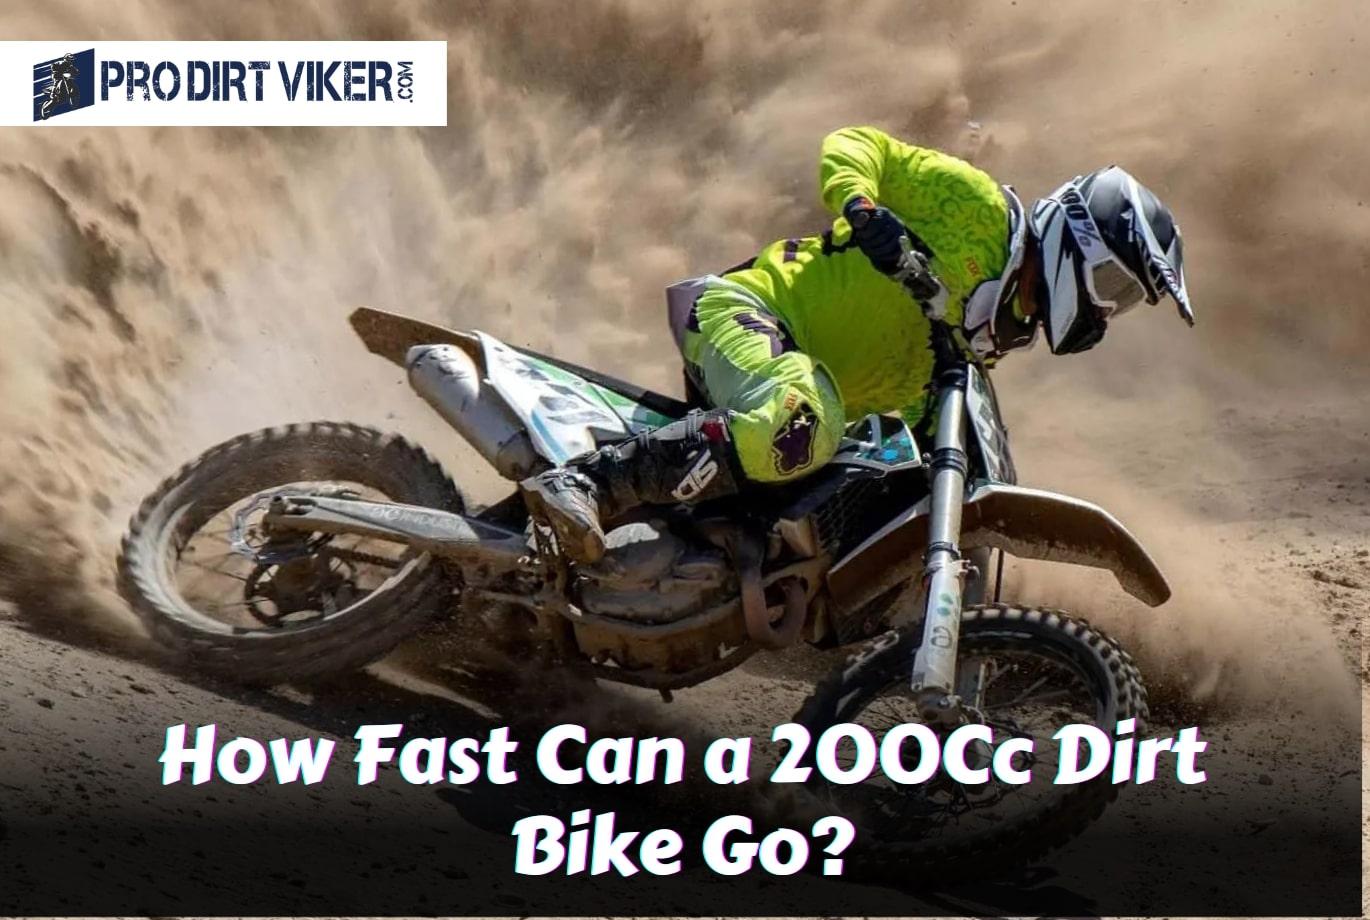 Unleashing the Speed: How Fast Can a 200Cc Dirt Bike Go?